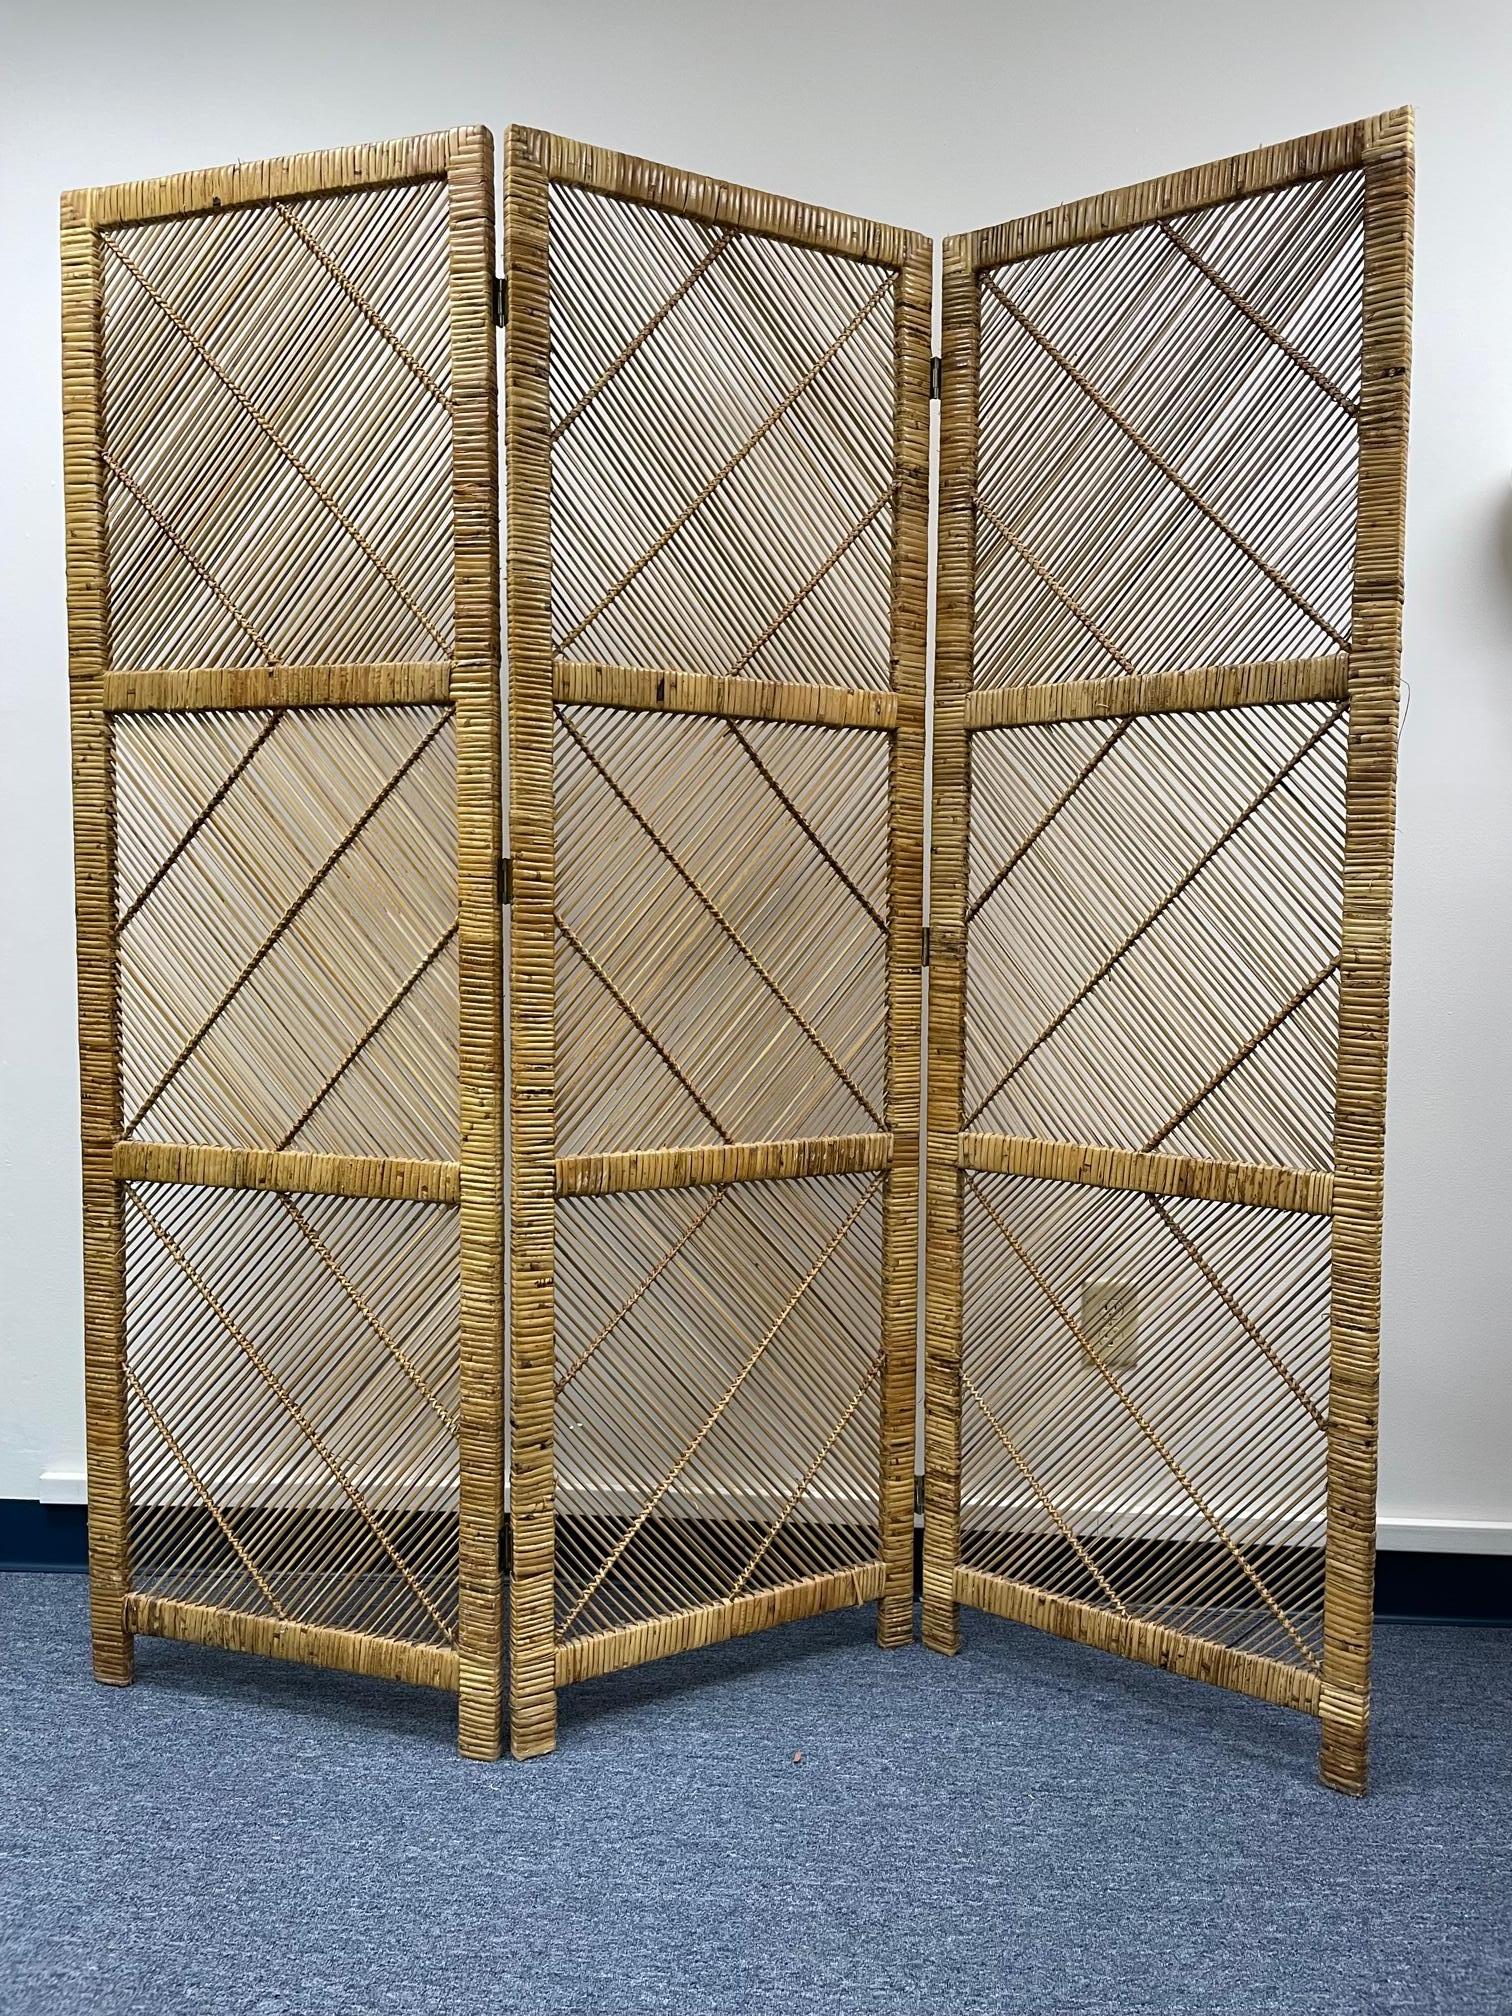 Vintage wicker room divider features three panels with a geometric woven design. Good condition with minor imperfections consistent with age.

 